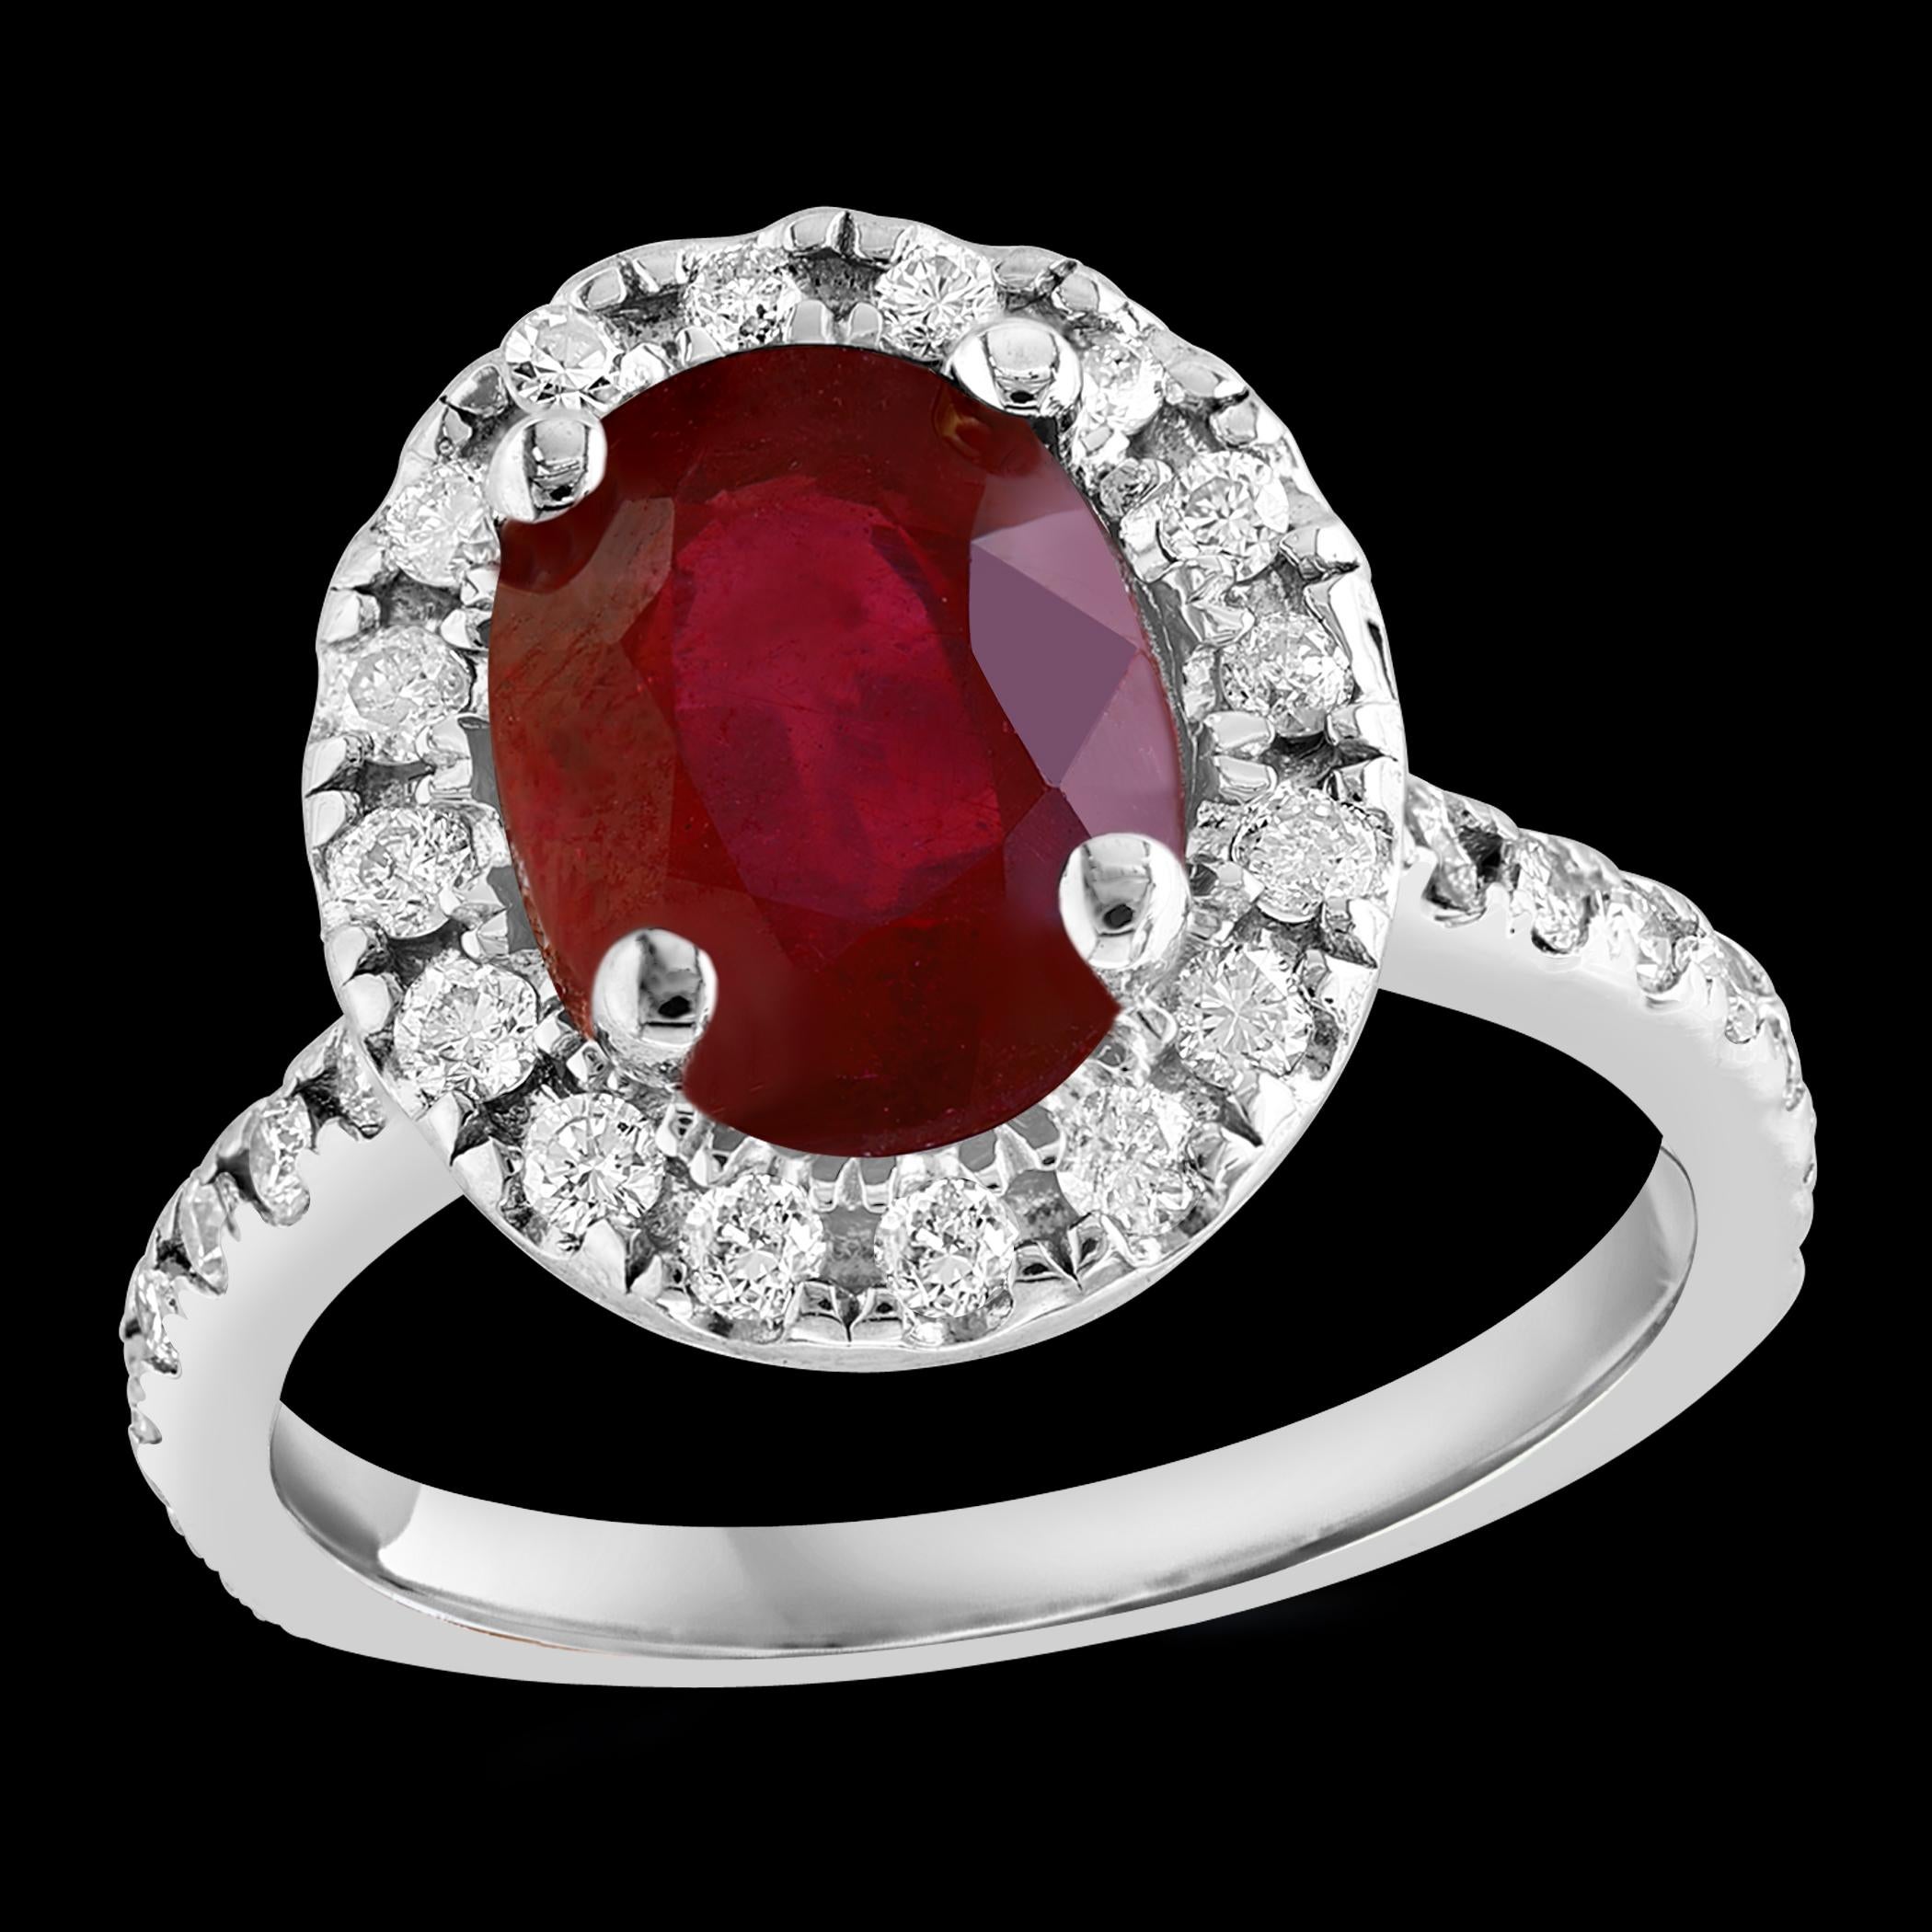 3 Carat Oval Treated Ruby & 1.25 ct Diamond Ring 14 Karat White Gold Size 6 For Sale 7